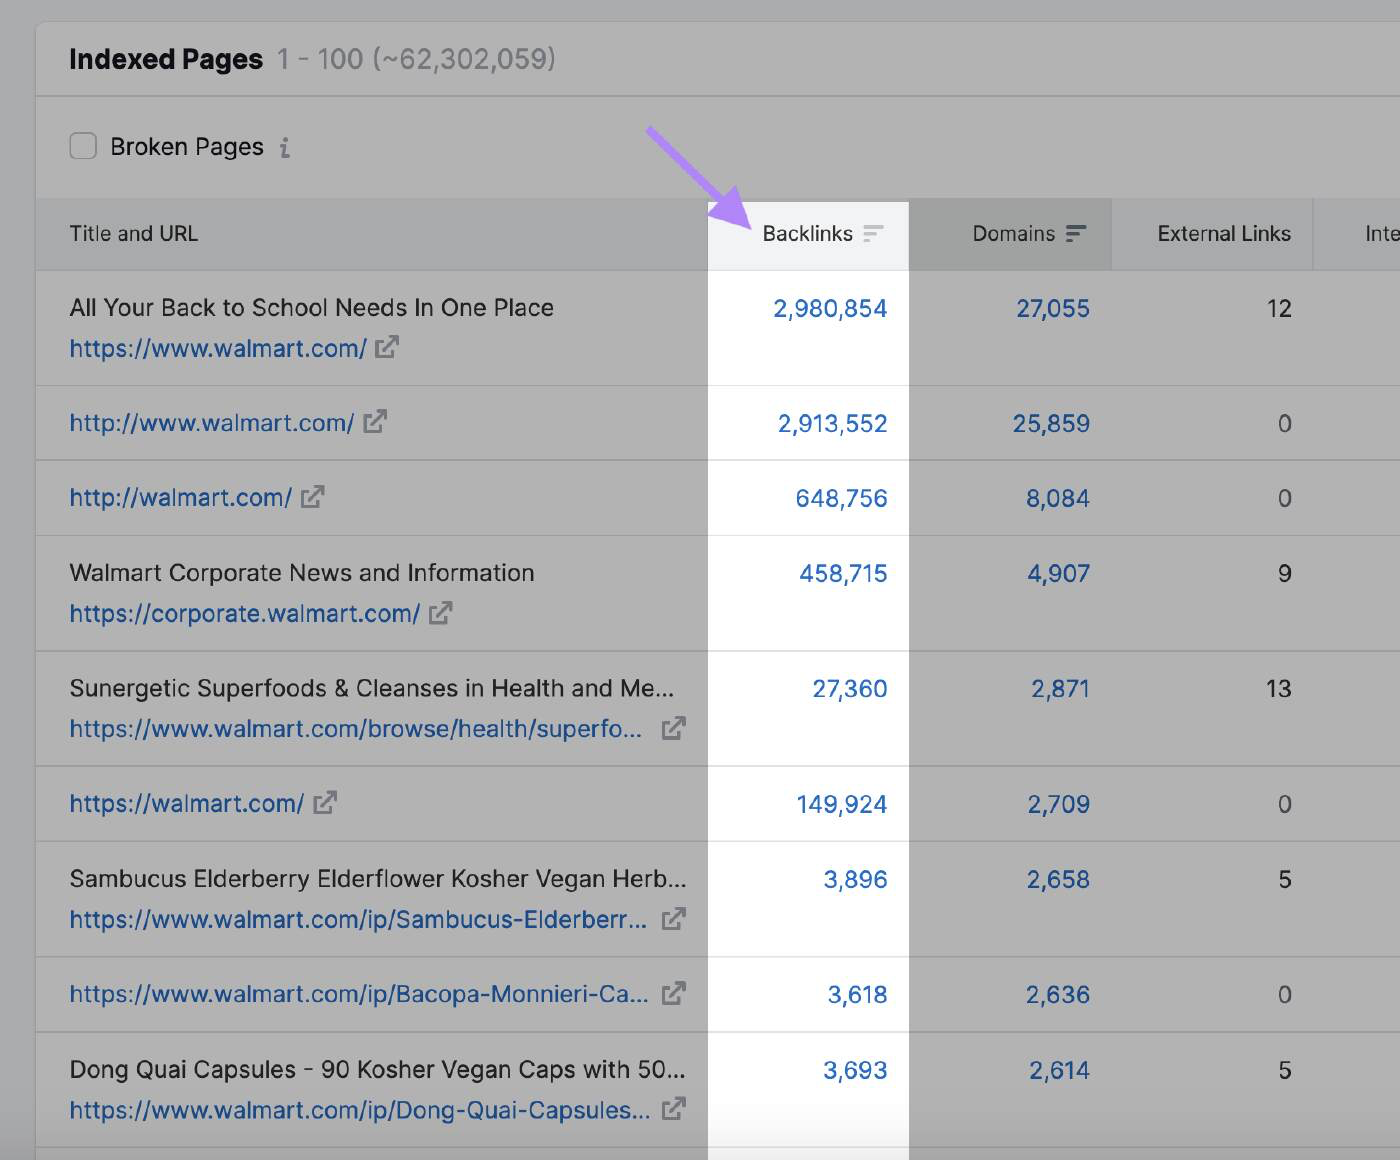 "Backlinks" column highlighted in "Indexed Pages" report